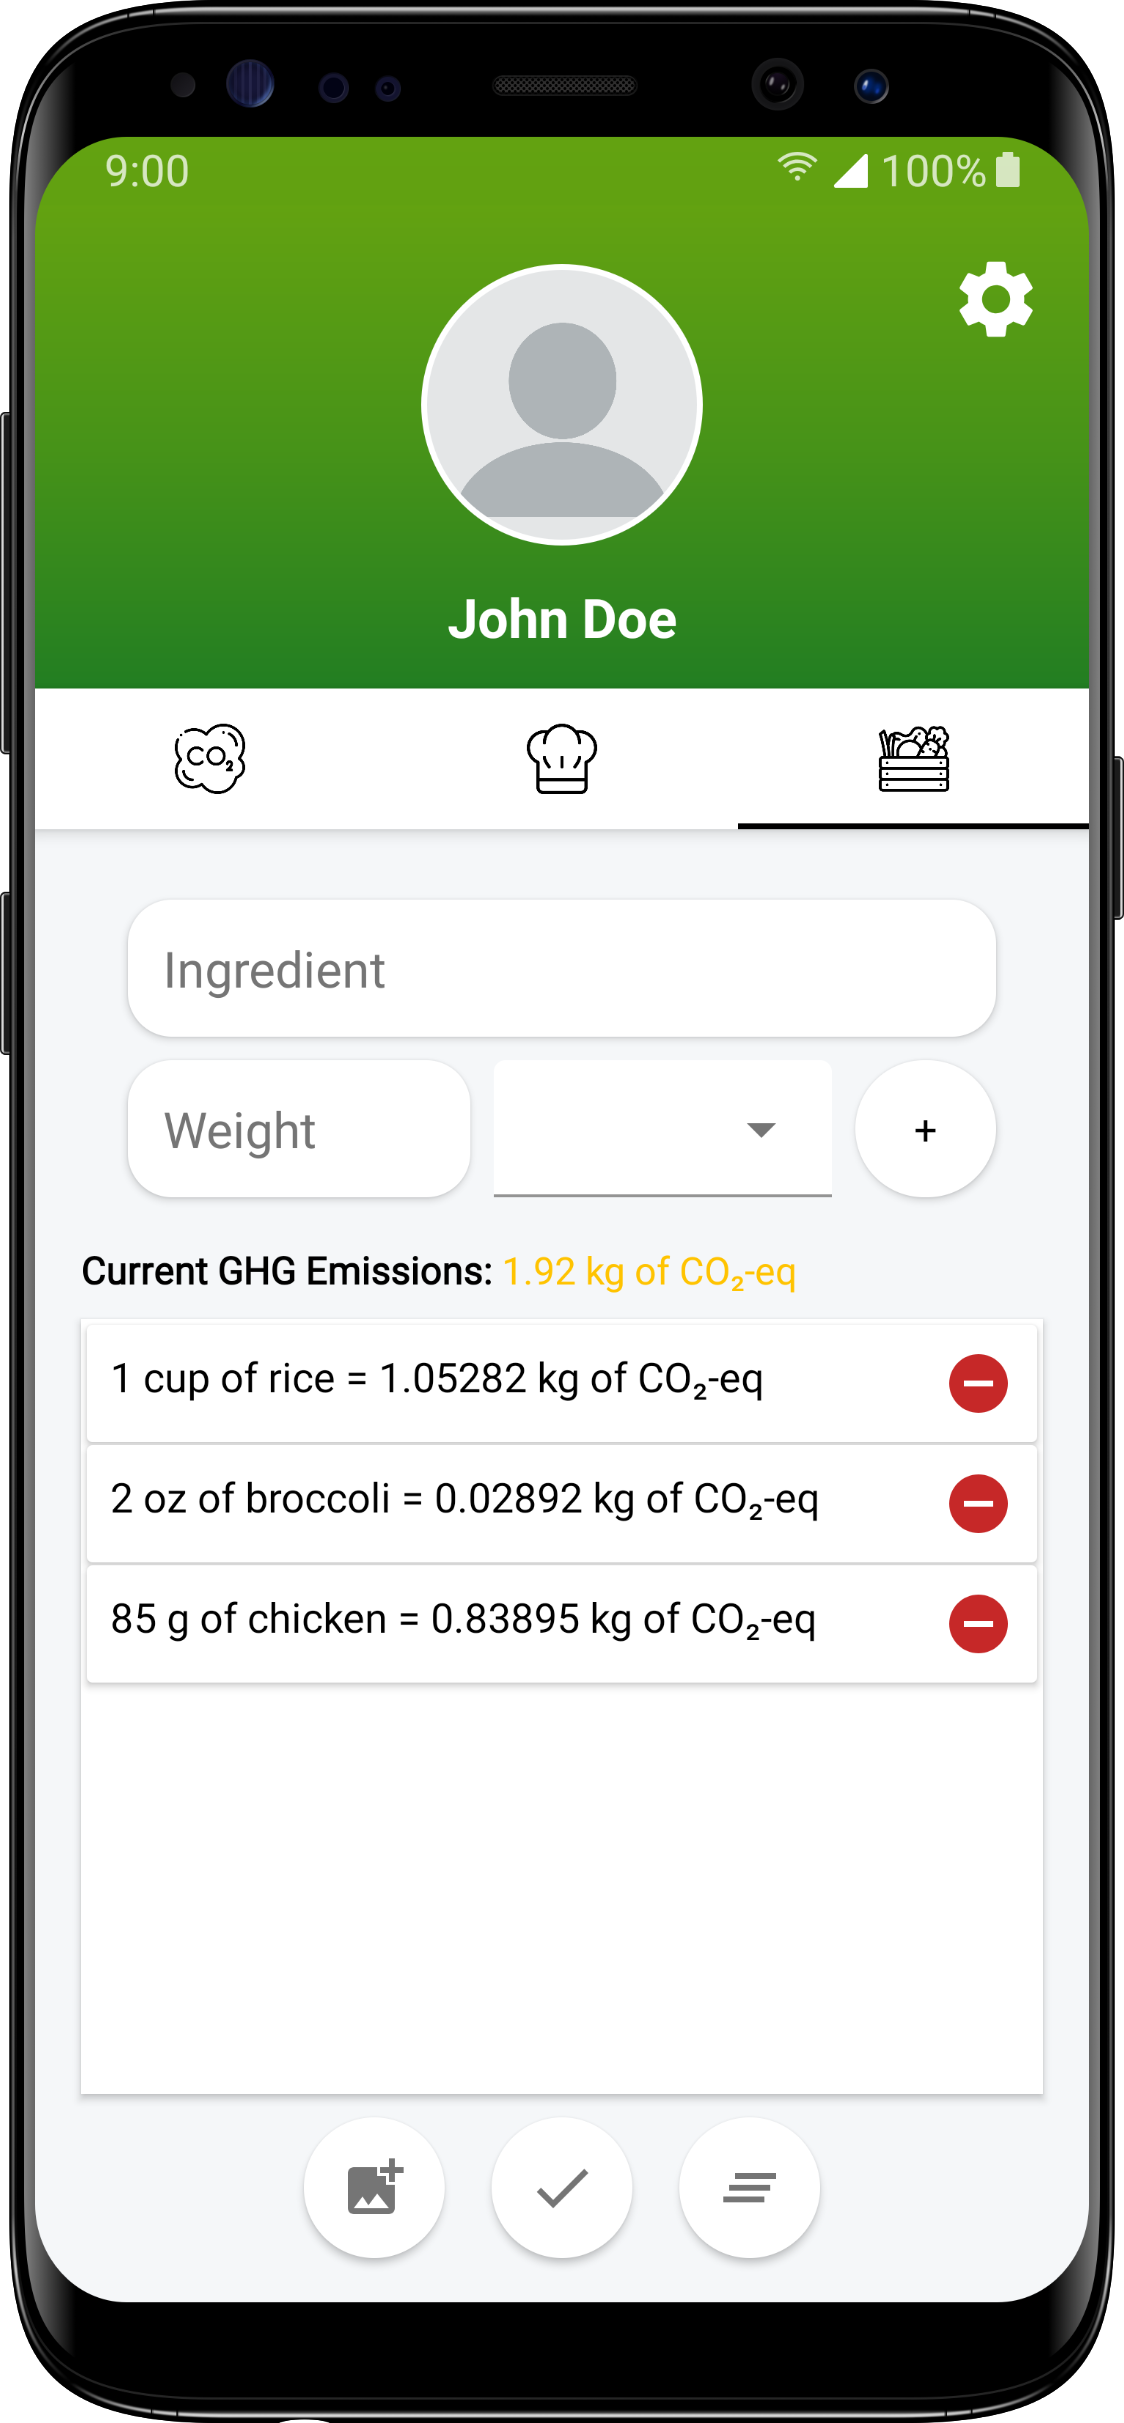 Mobile screen of the emissions calculated in carbon dioxide equivalents for
                                individual ingredients the user provided.